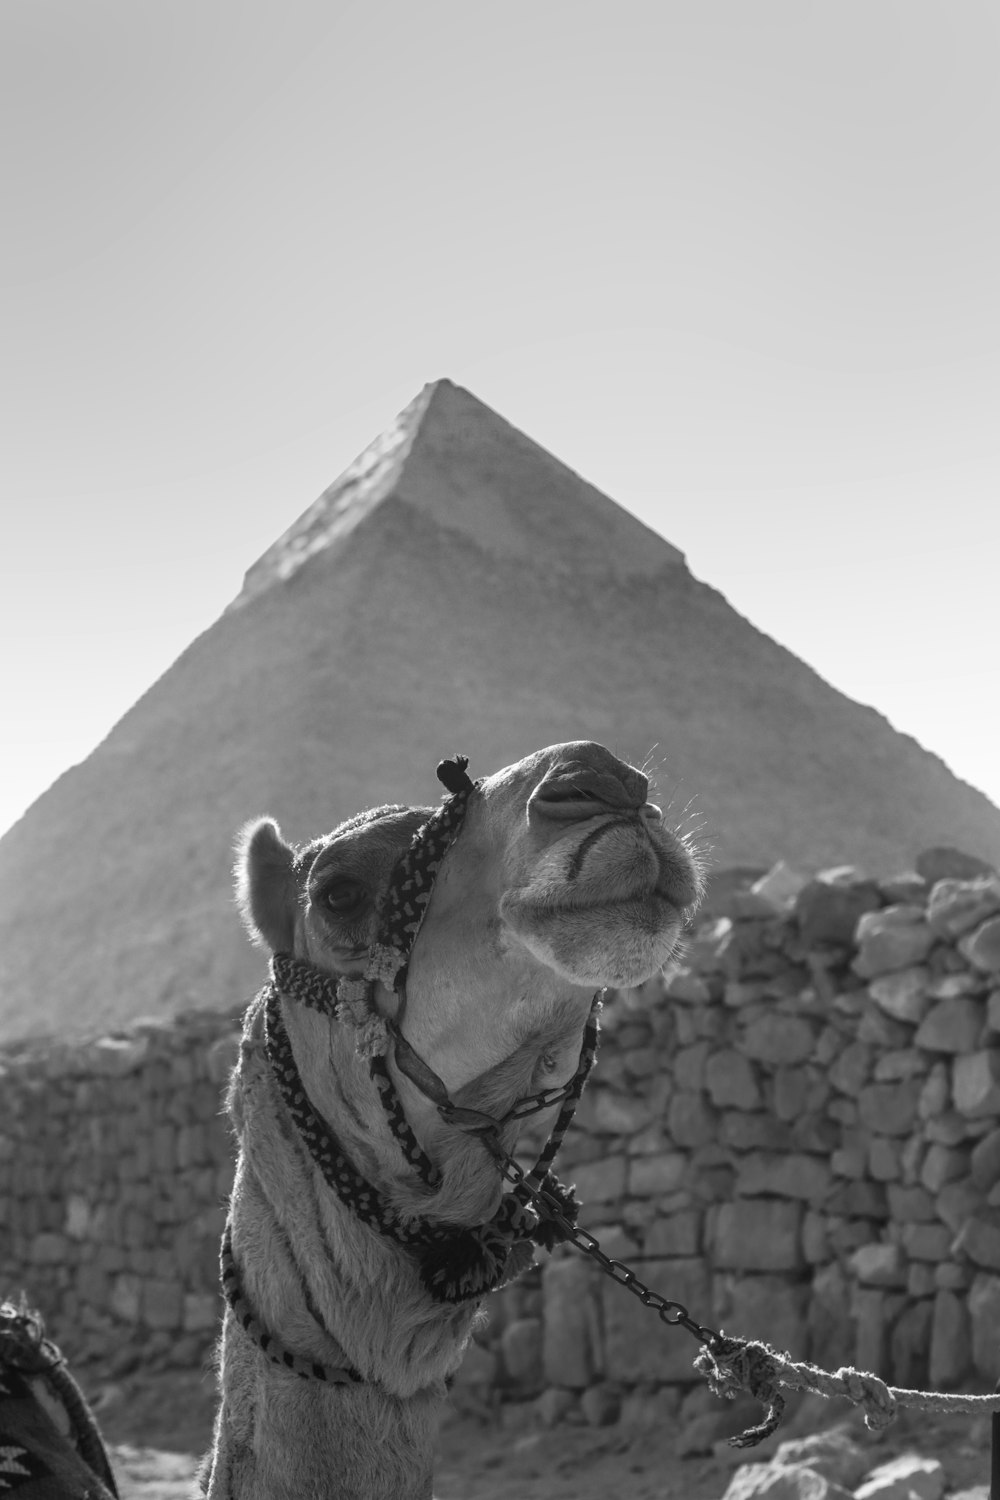 grayscale photo of camel in front of pyramid